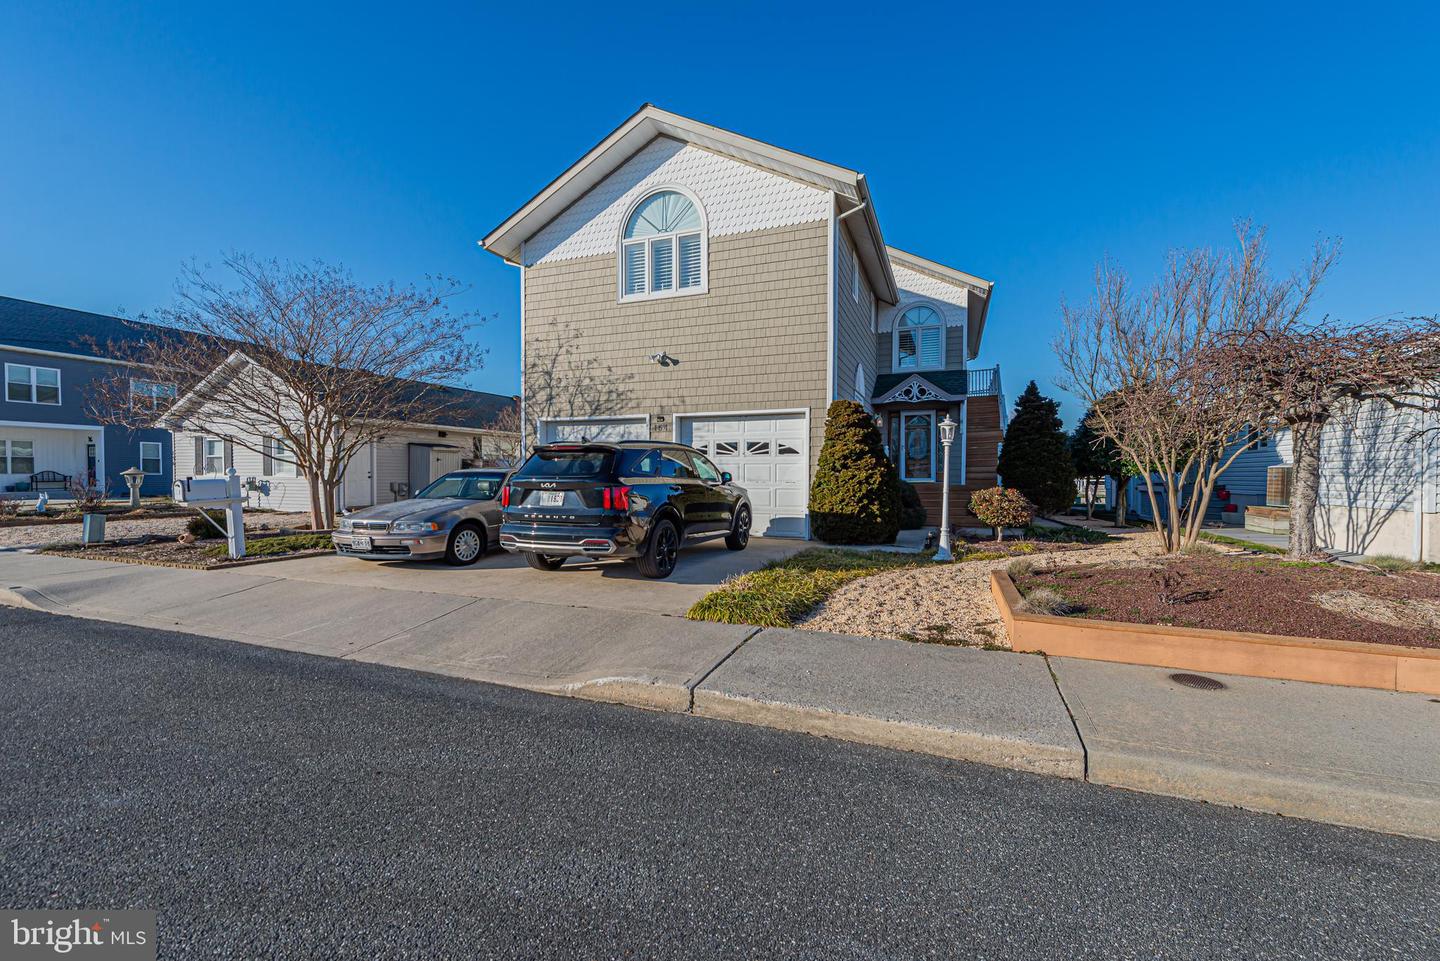 154 Old Wharf Road, Ocean City, Maryland, 21842, United States, 4 Bedrooms Bedrooms, ,3 BathroomsBathrooms,Residential,For Sale,154 Old Wharf Road,1479271